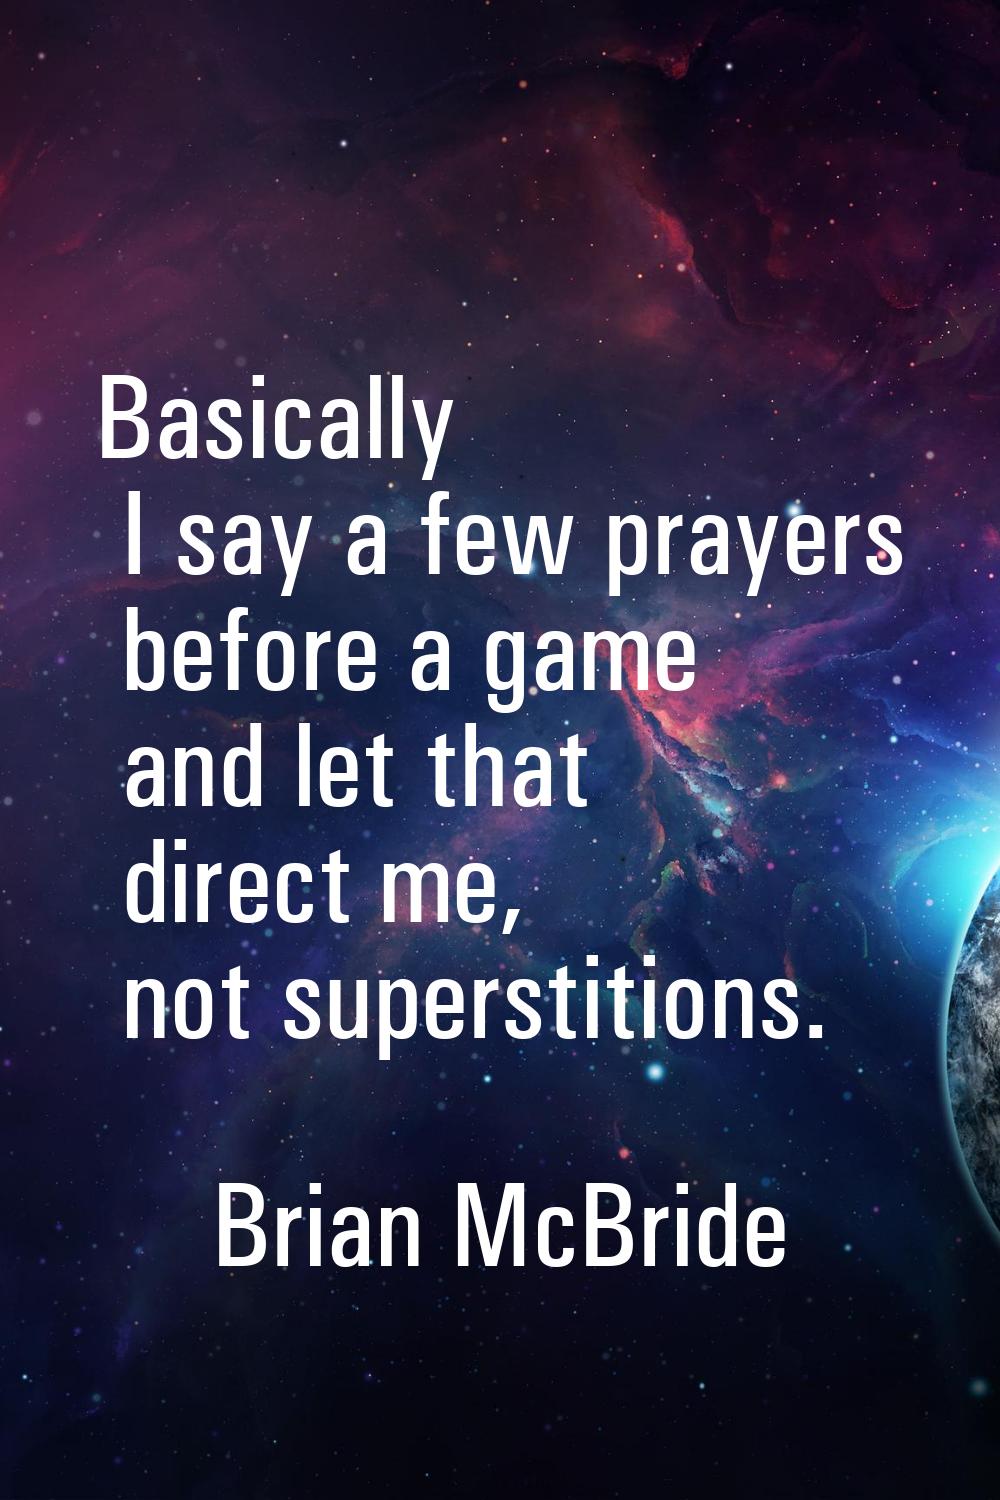 Basically I say a few prayers before a game and let that direct me, not superstitions.